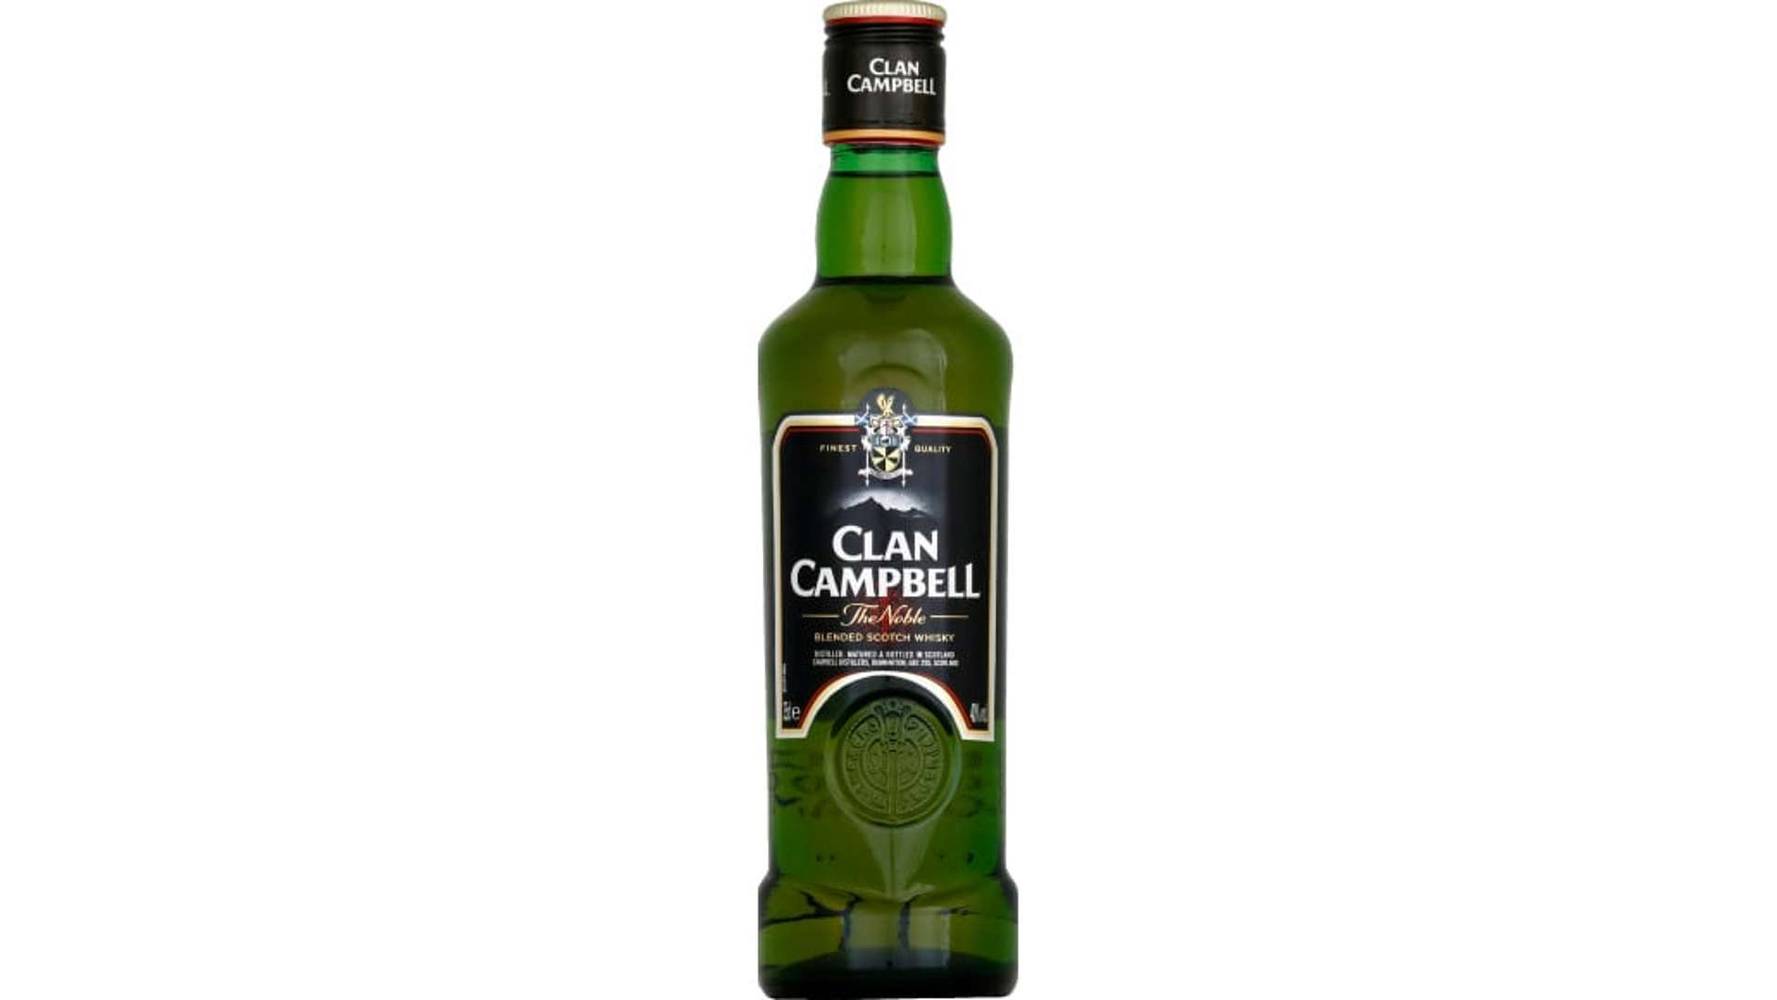 Clan Campbell - Whisky scotch (350 ml)